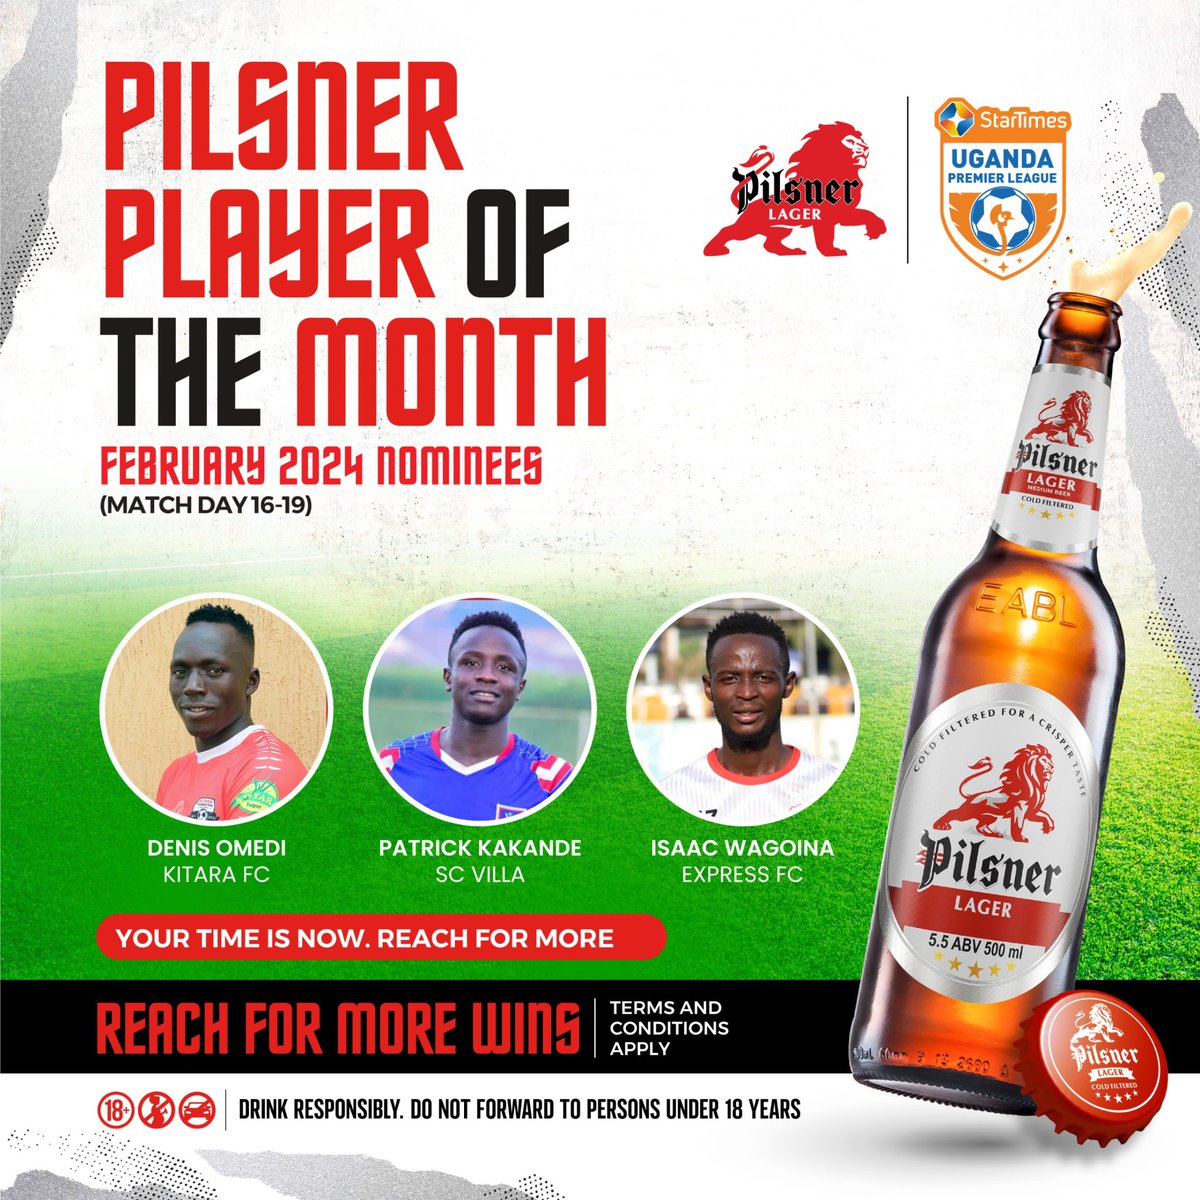 Royals forward @denis_omedi24 has been nominated for the @PilsnerLagerUg player of the month of February. All the best 💪 #KitaraUpdates | #PrideOfBunyoro